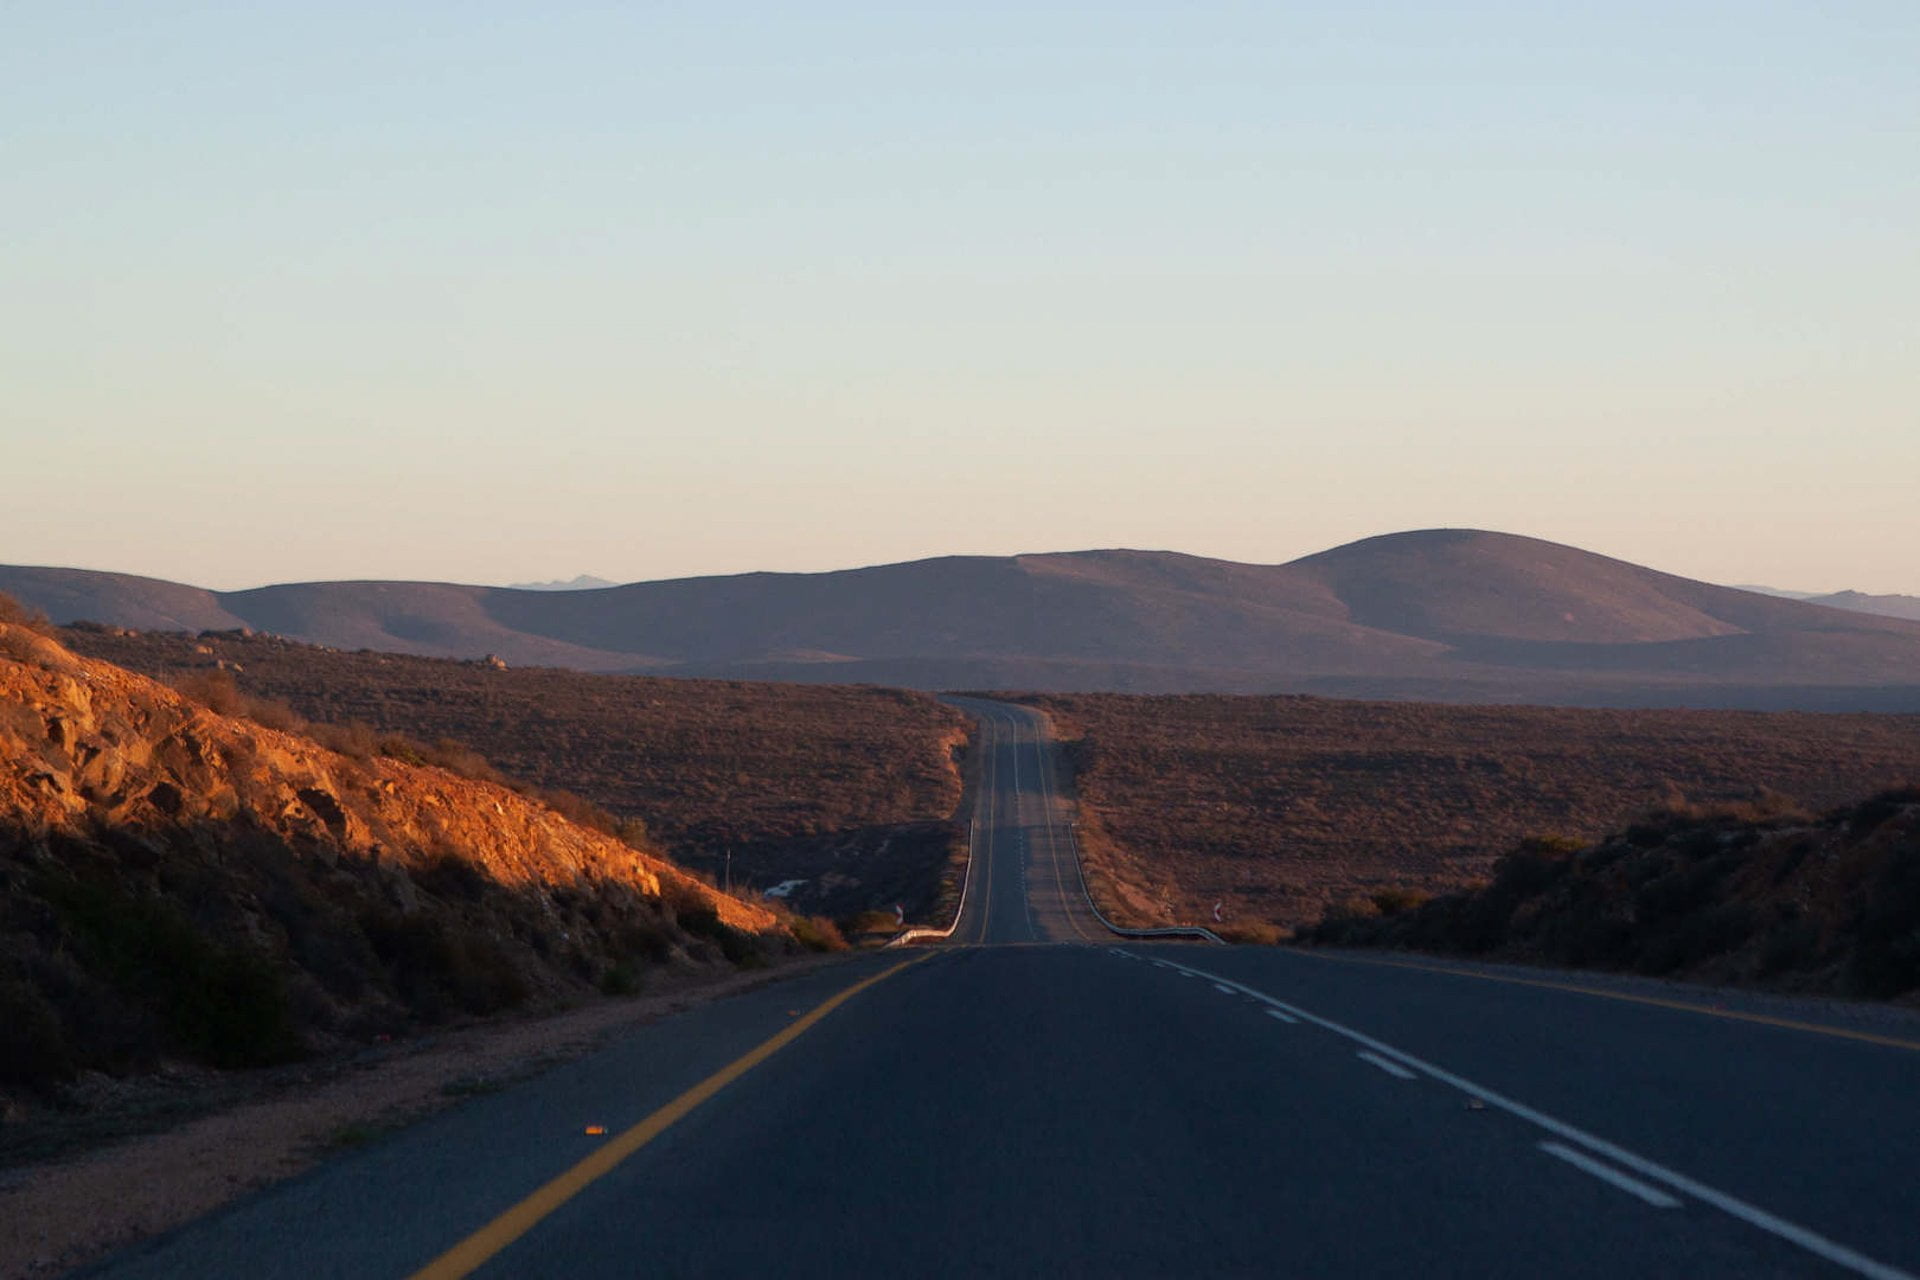 Sunrise view of highway driving towards the Namibian border.